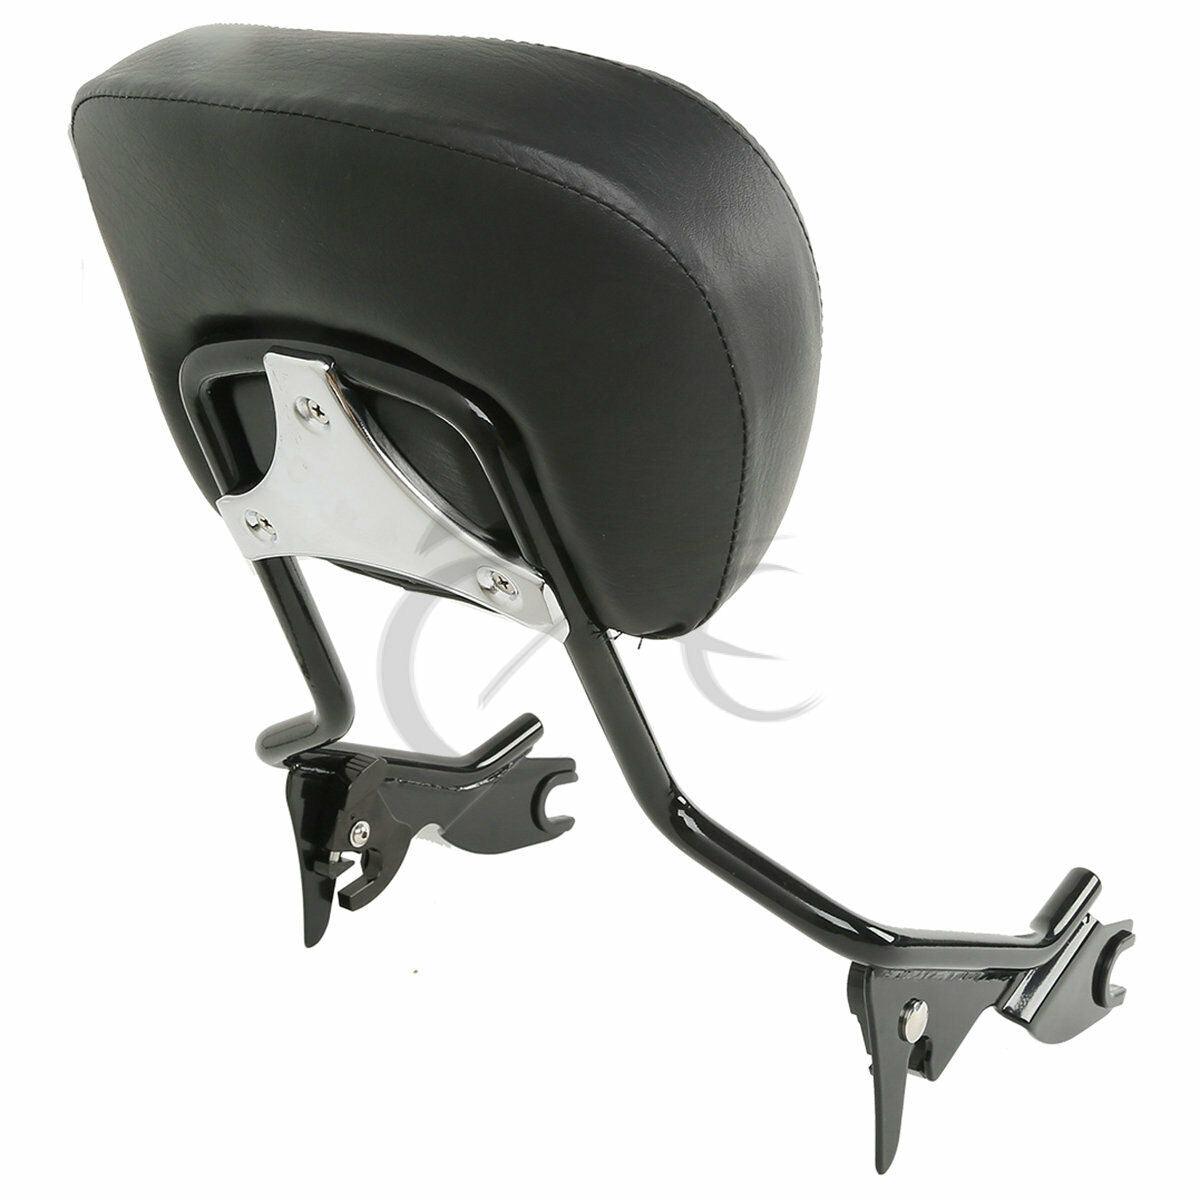 Backrest Sissy Bar Luggage Rack 4 Point Docking Fit For Harley Road Glide 09-13 - Moto Life Products